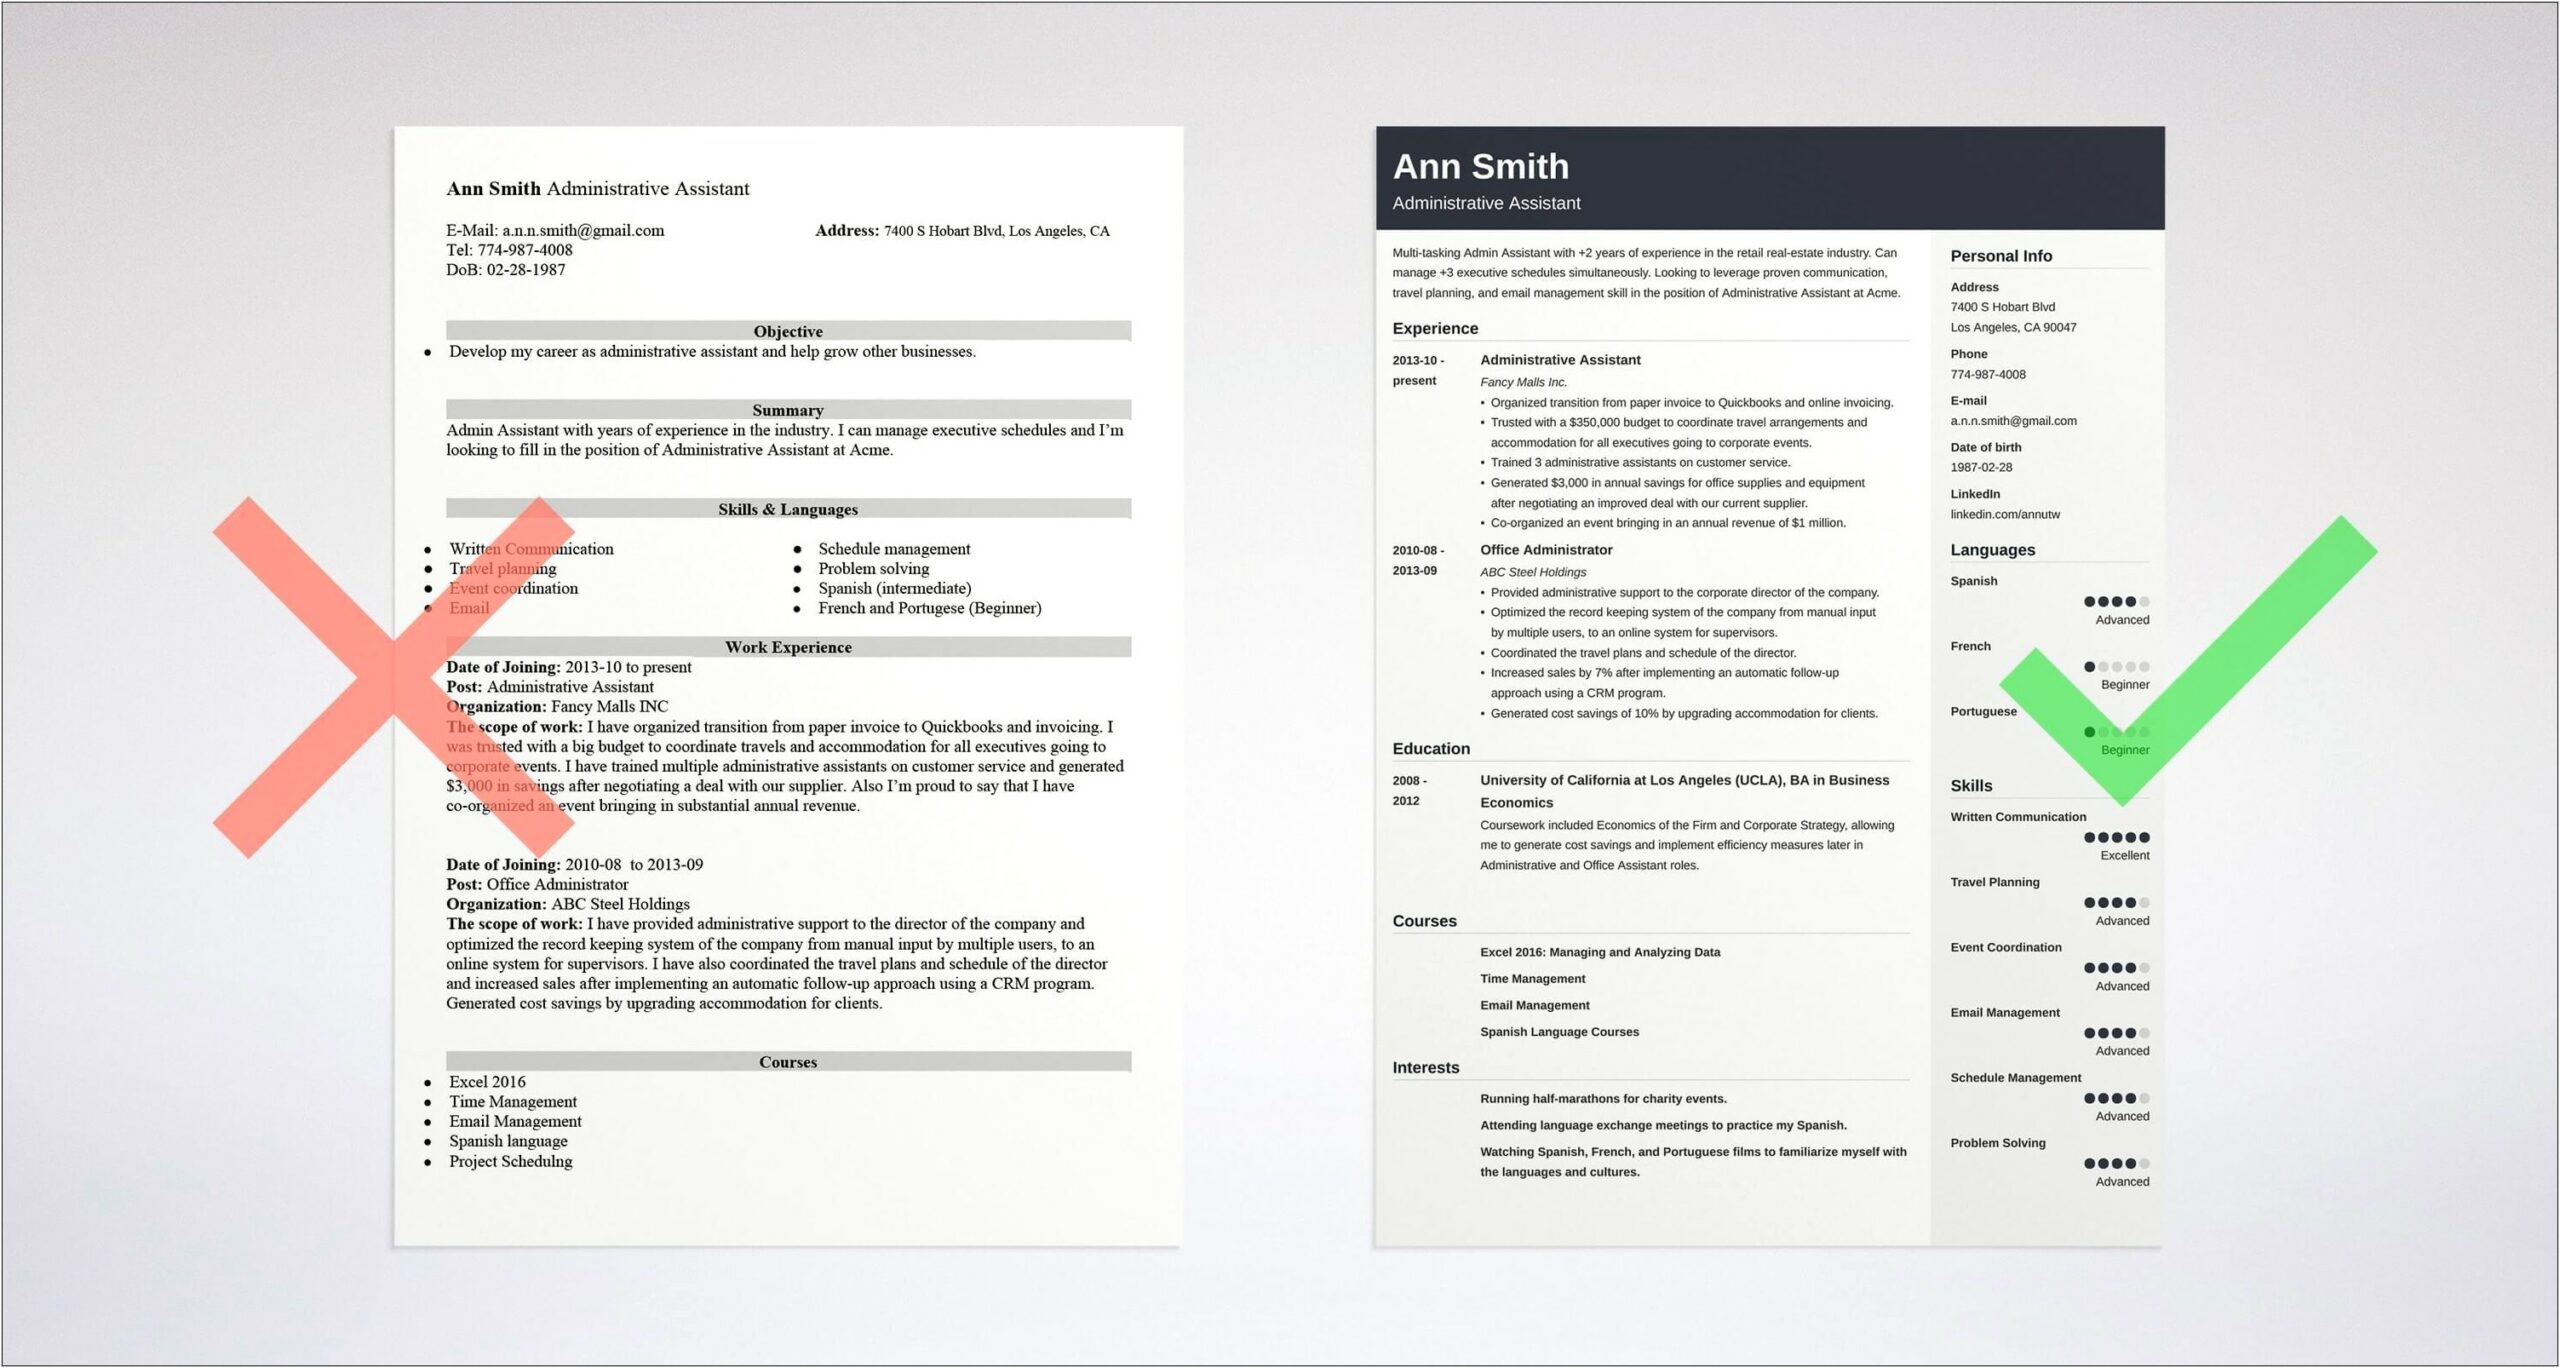 Resume Personal Profile Statement Examples Administrative Assistant